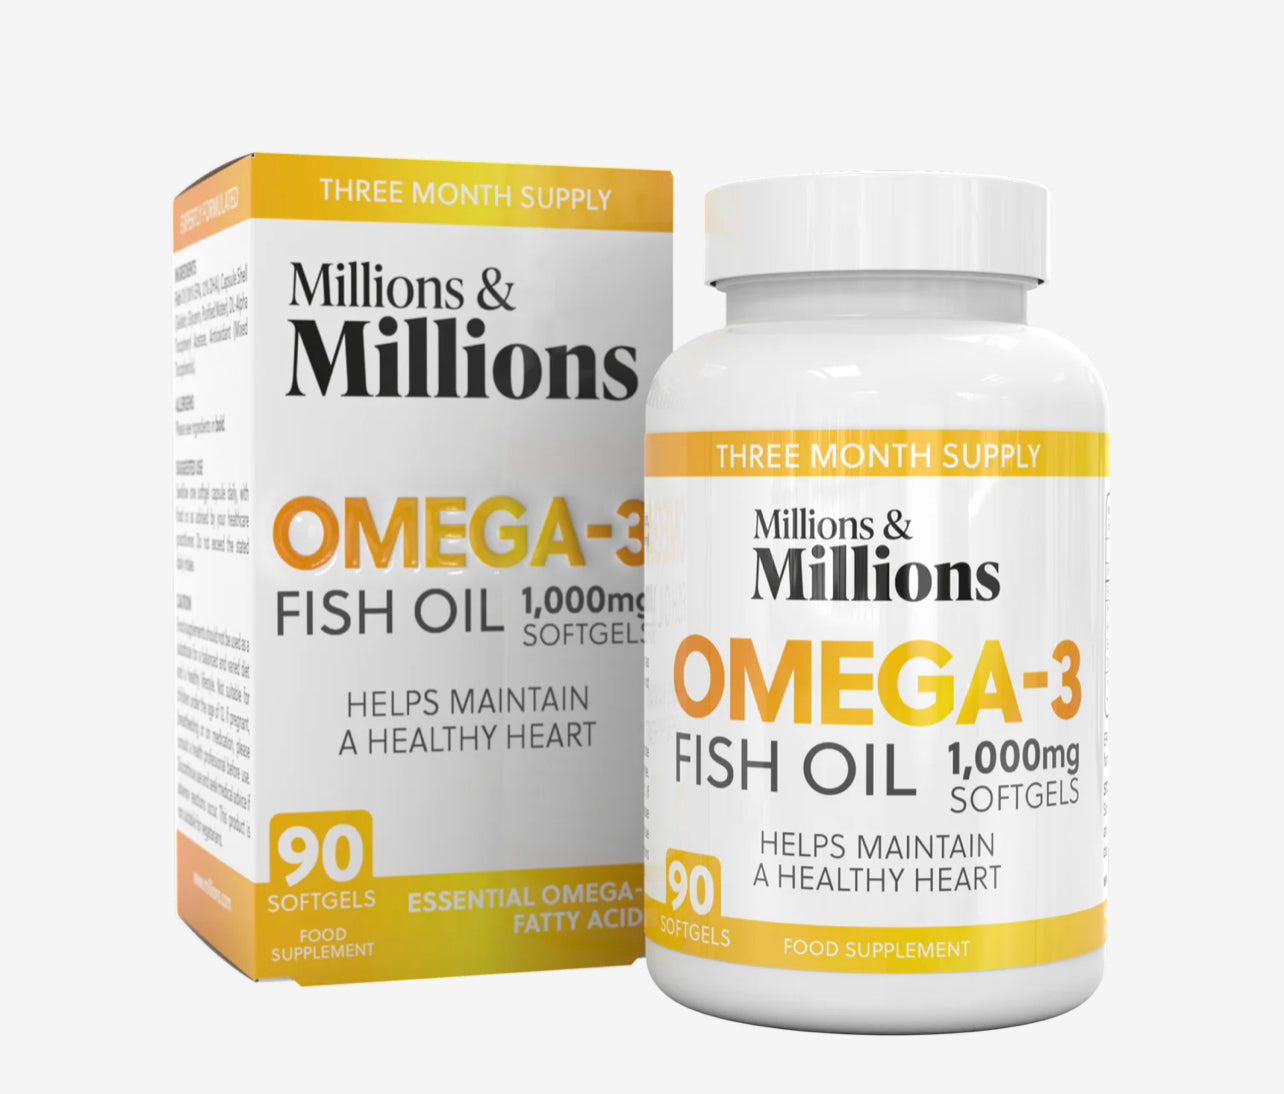 Millions and Millions Omega-3 Fish Oil 1000mg